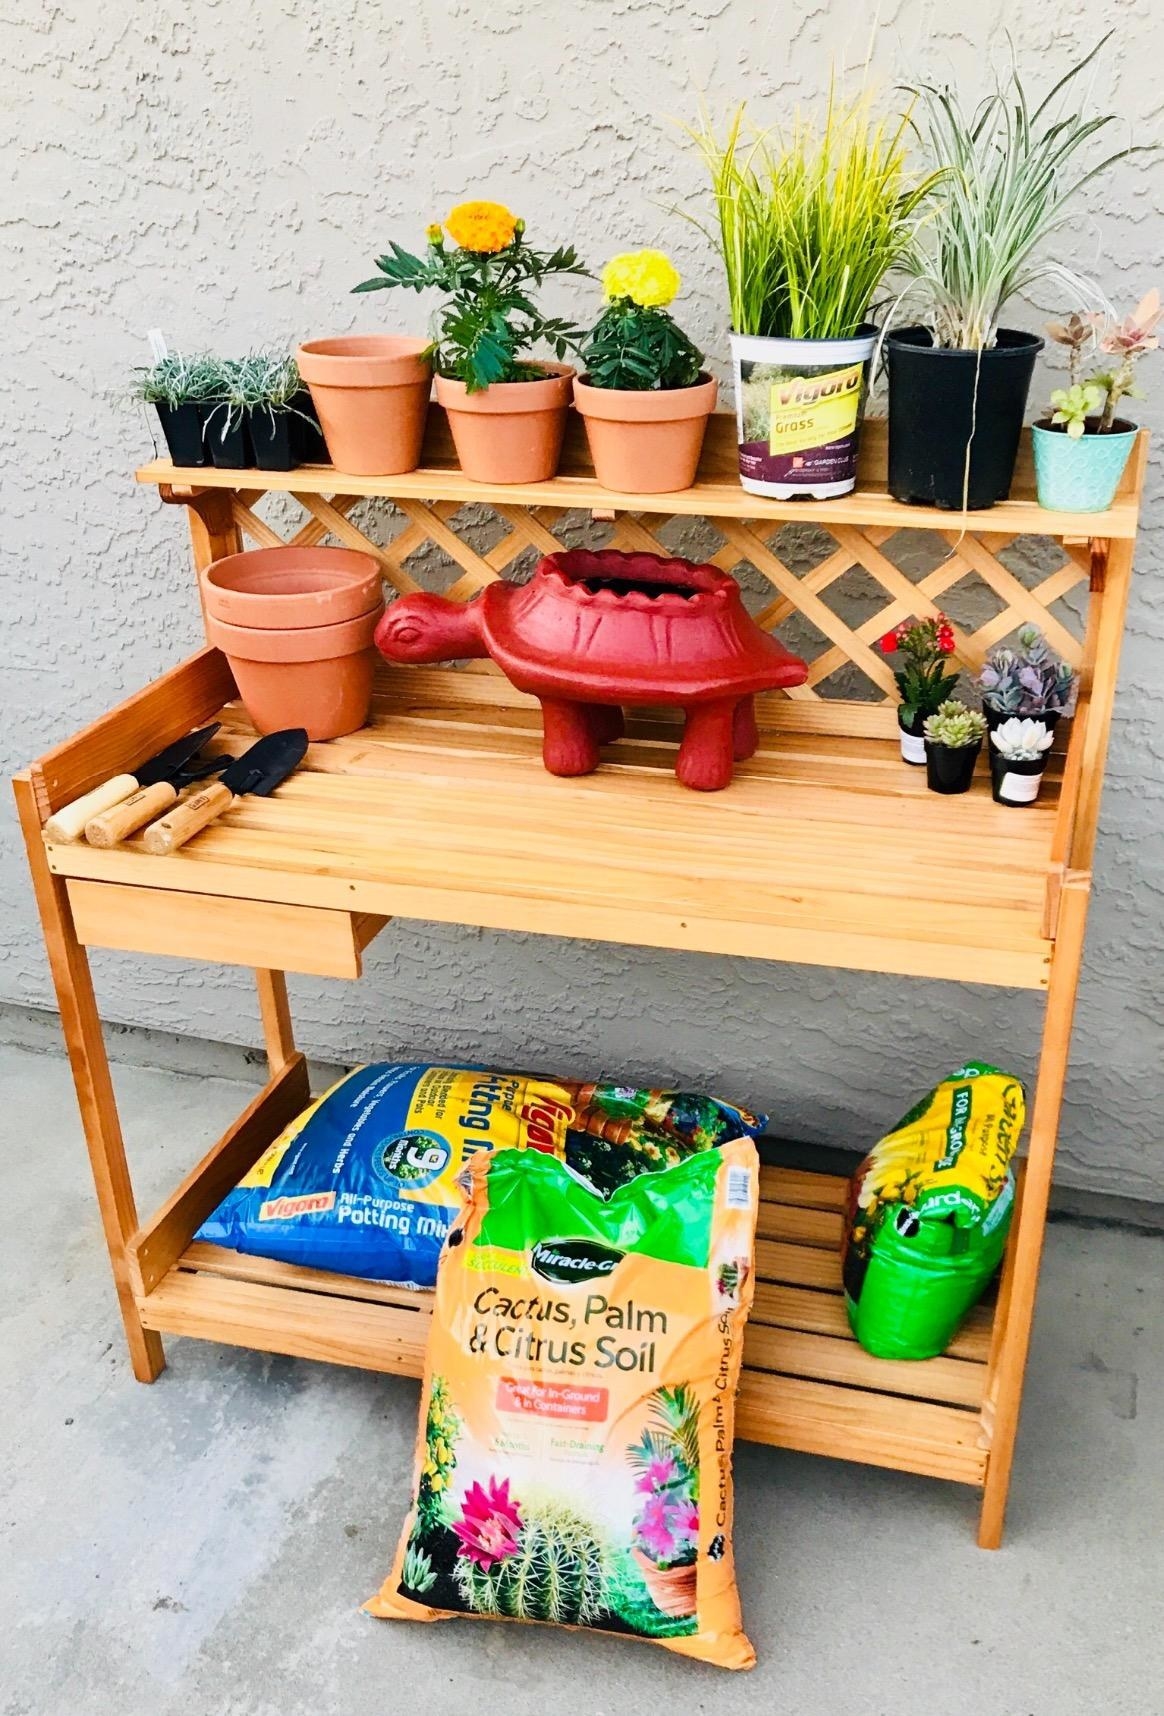 Reviewer&#x27;s photo of the potting bench with pots, tools, bags of soil, and other gardening supplies stored on it